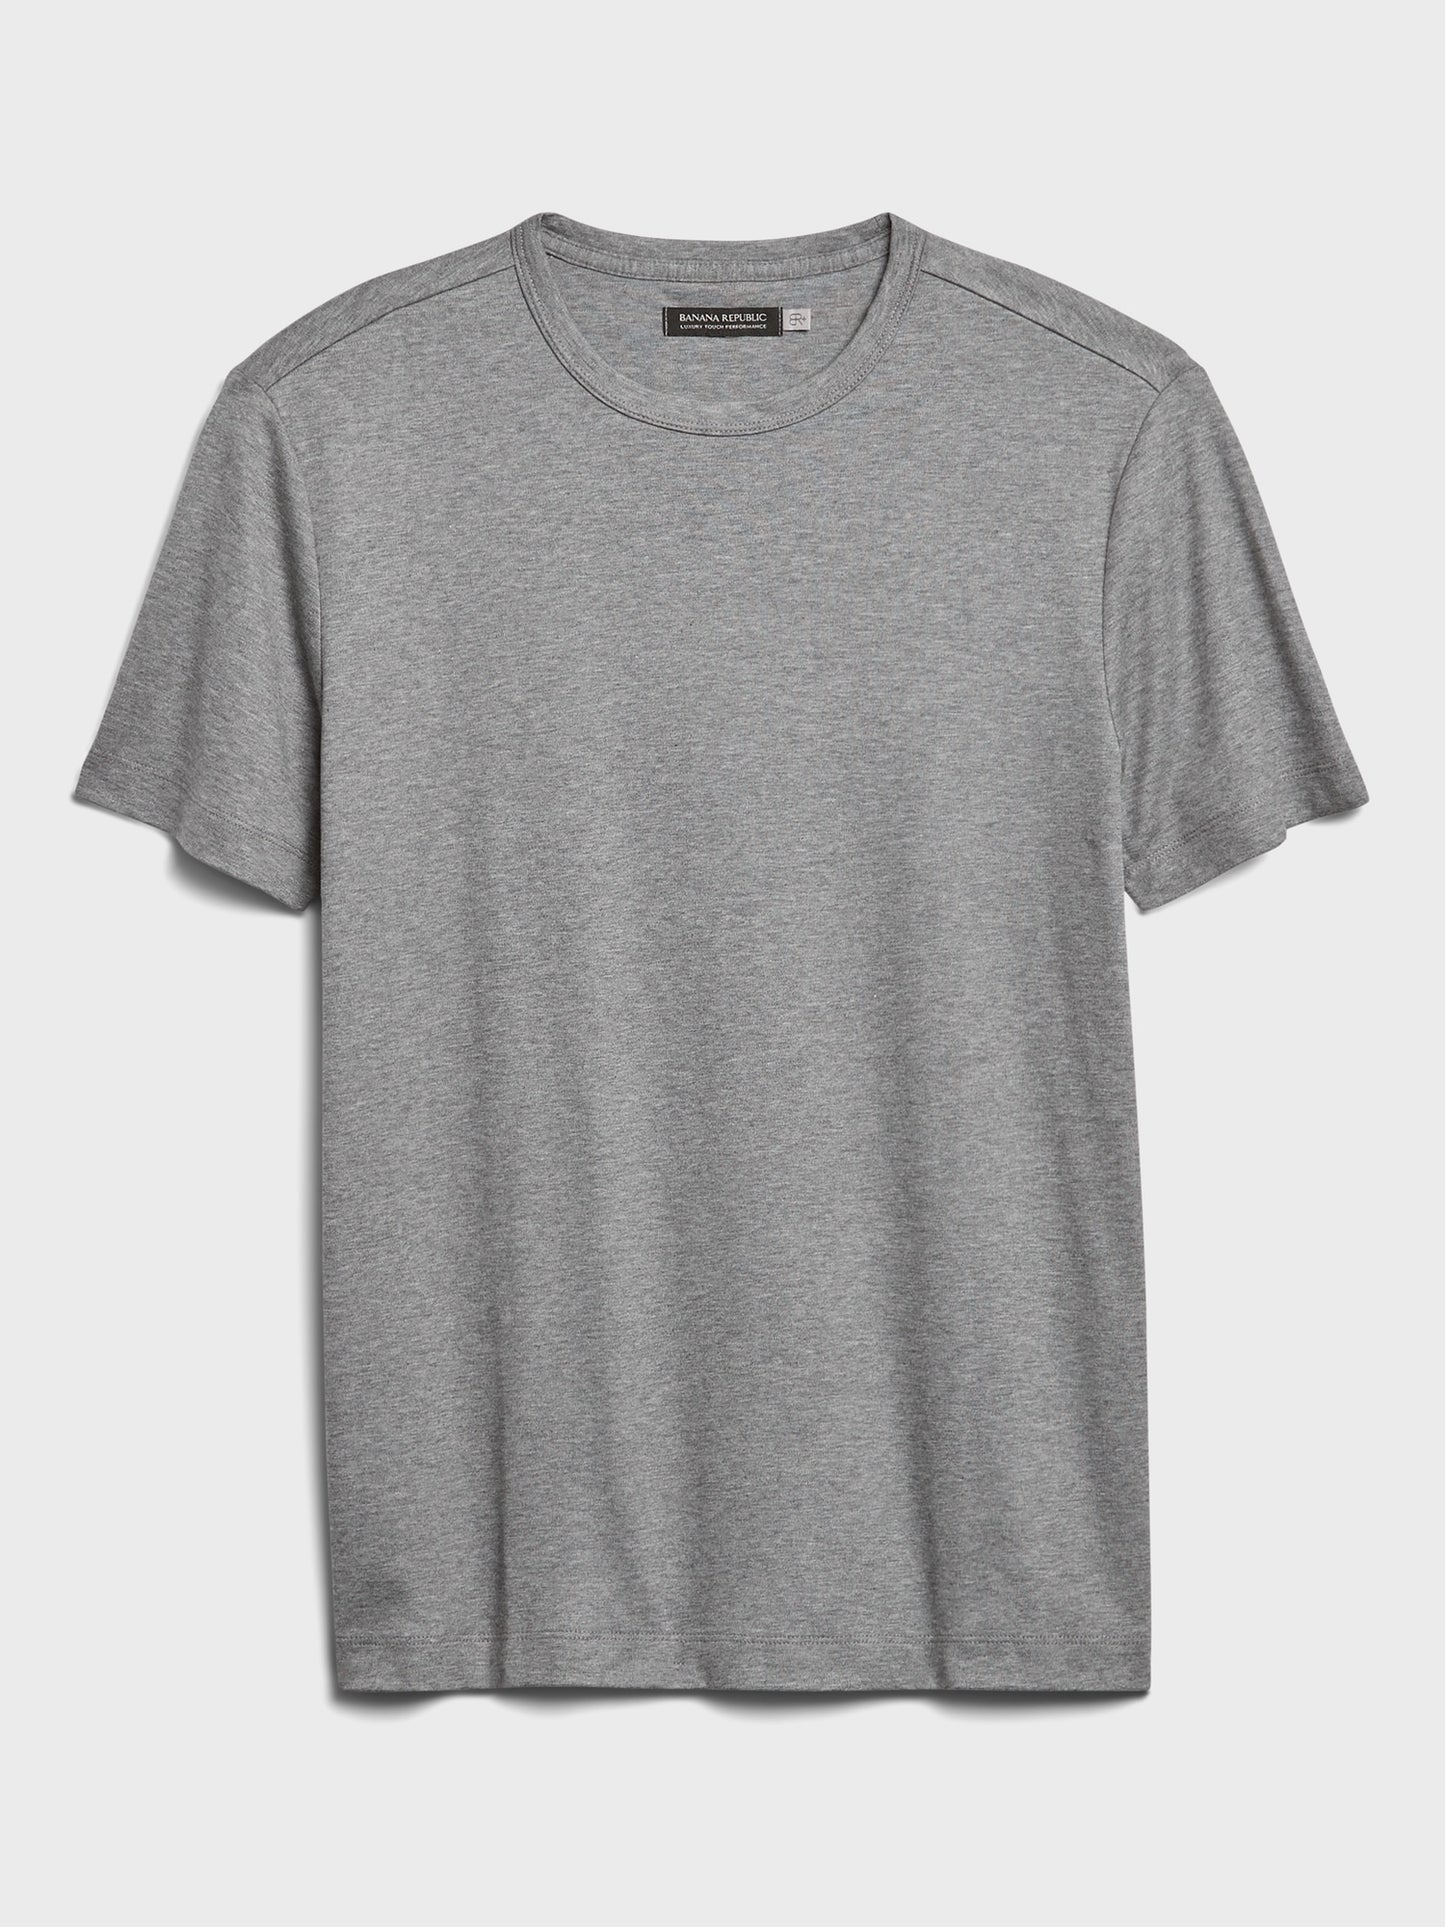 BR Luxury Touch Performance T-Shirt - Dark Charcoal Heather